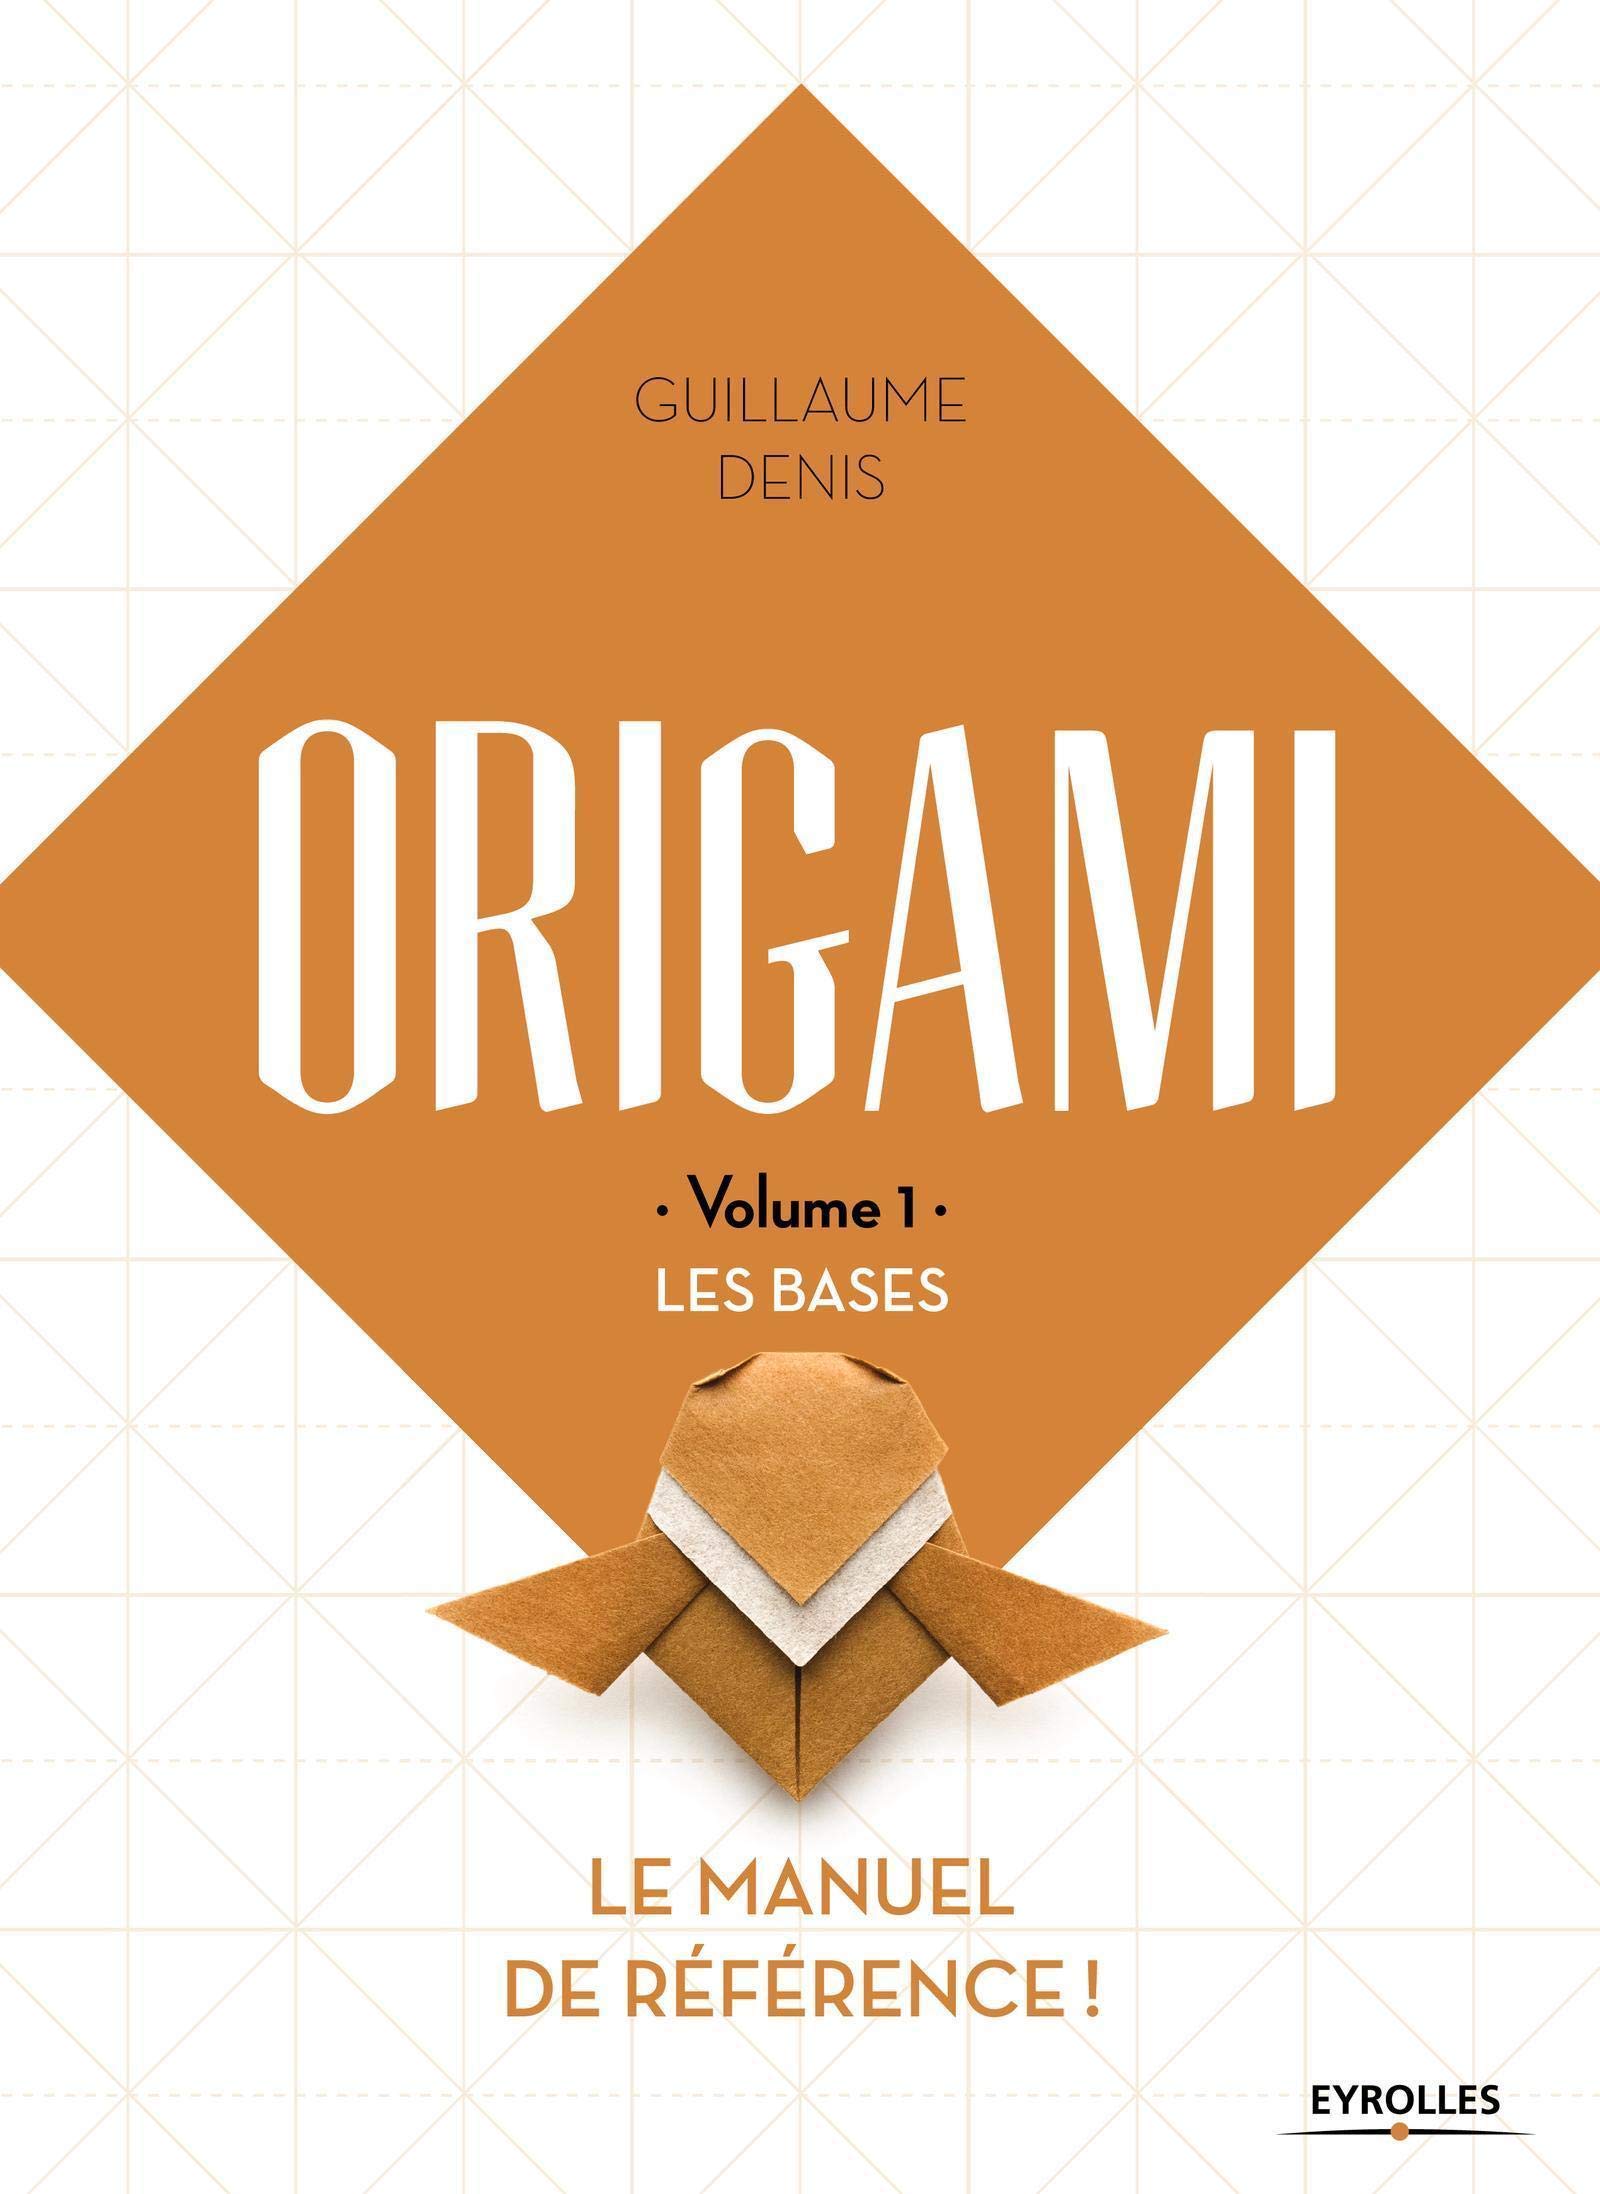 ORIGAMI - Volume 1 - LES BASES : page 102.